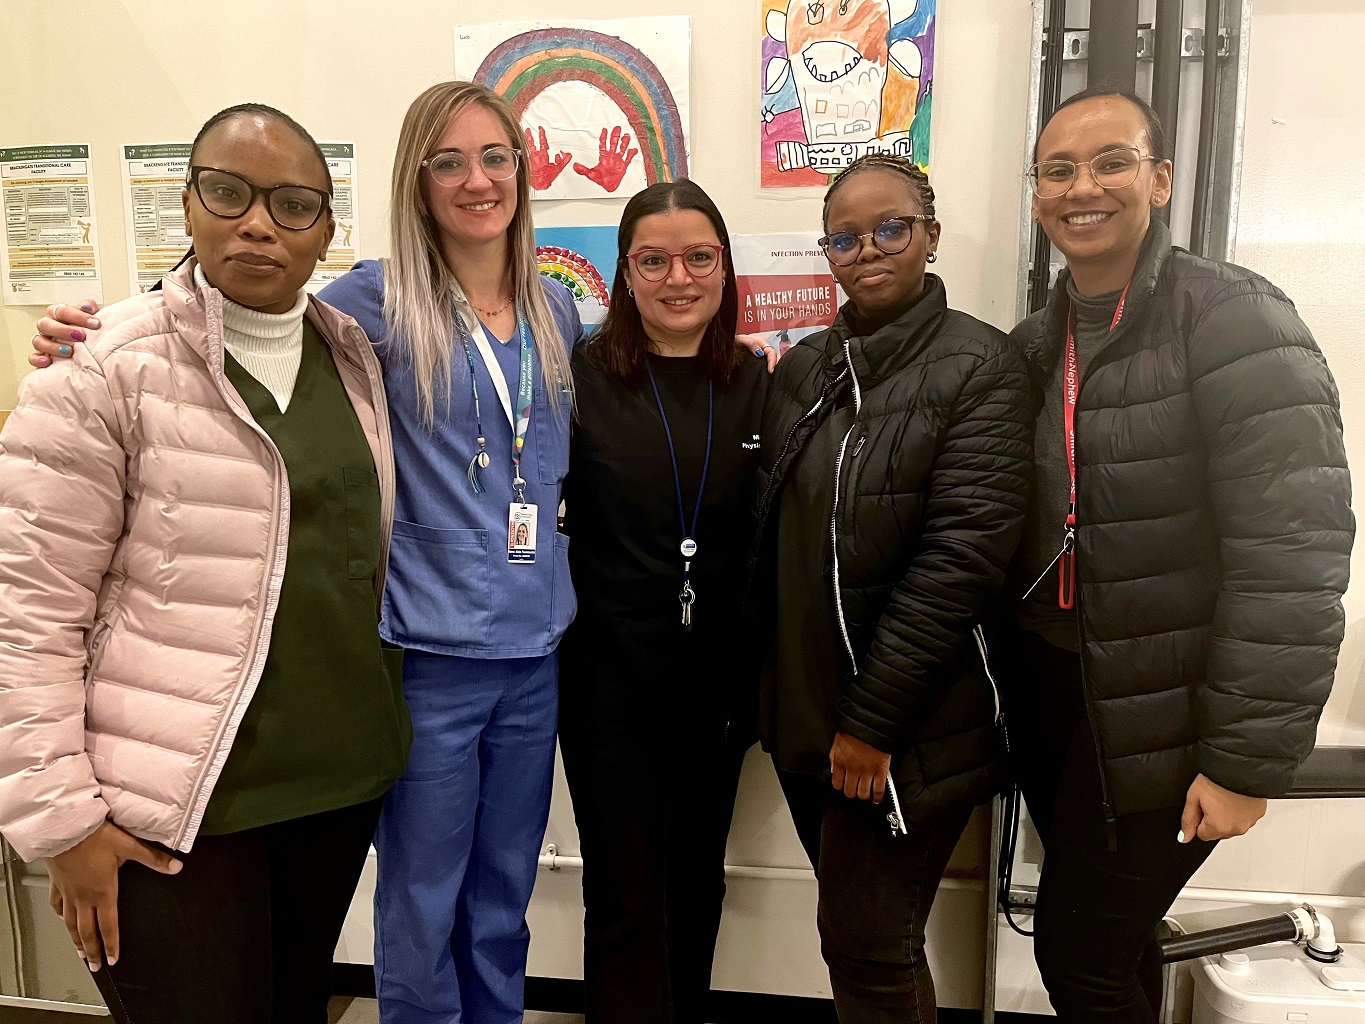 Some members of Brackengate’s transitional care team, from left to right: dietician Nokwando Mbambo, speech therapist Alicia Toumilovitch, physiotherapist Mariam Parker, social worker Lilitha Mtambeka and medical officer Dr Randy Fakier. 